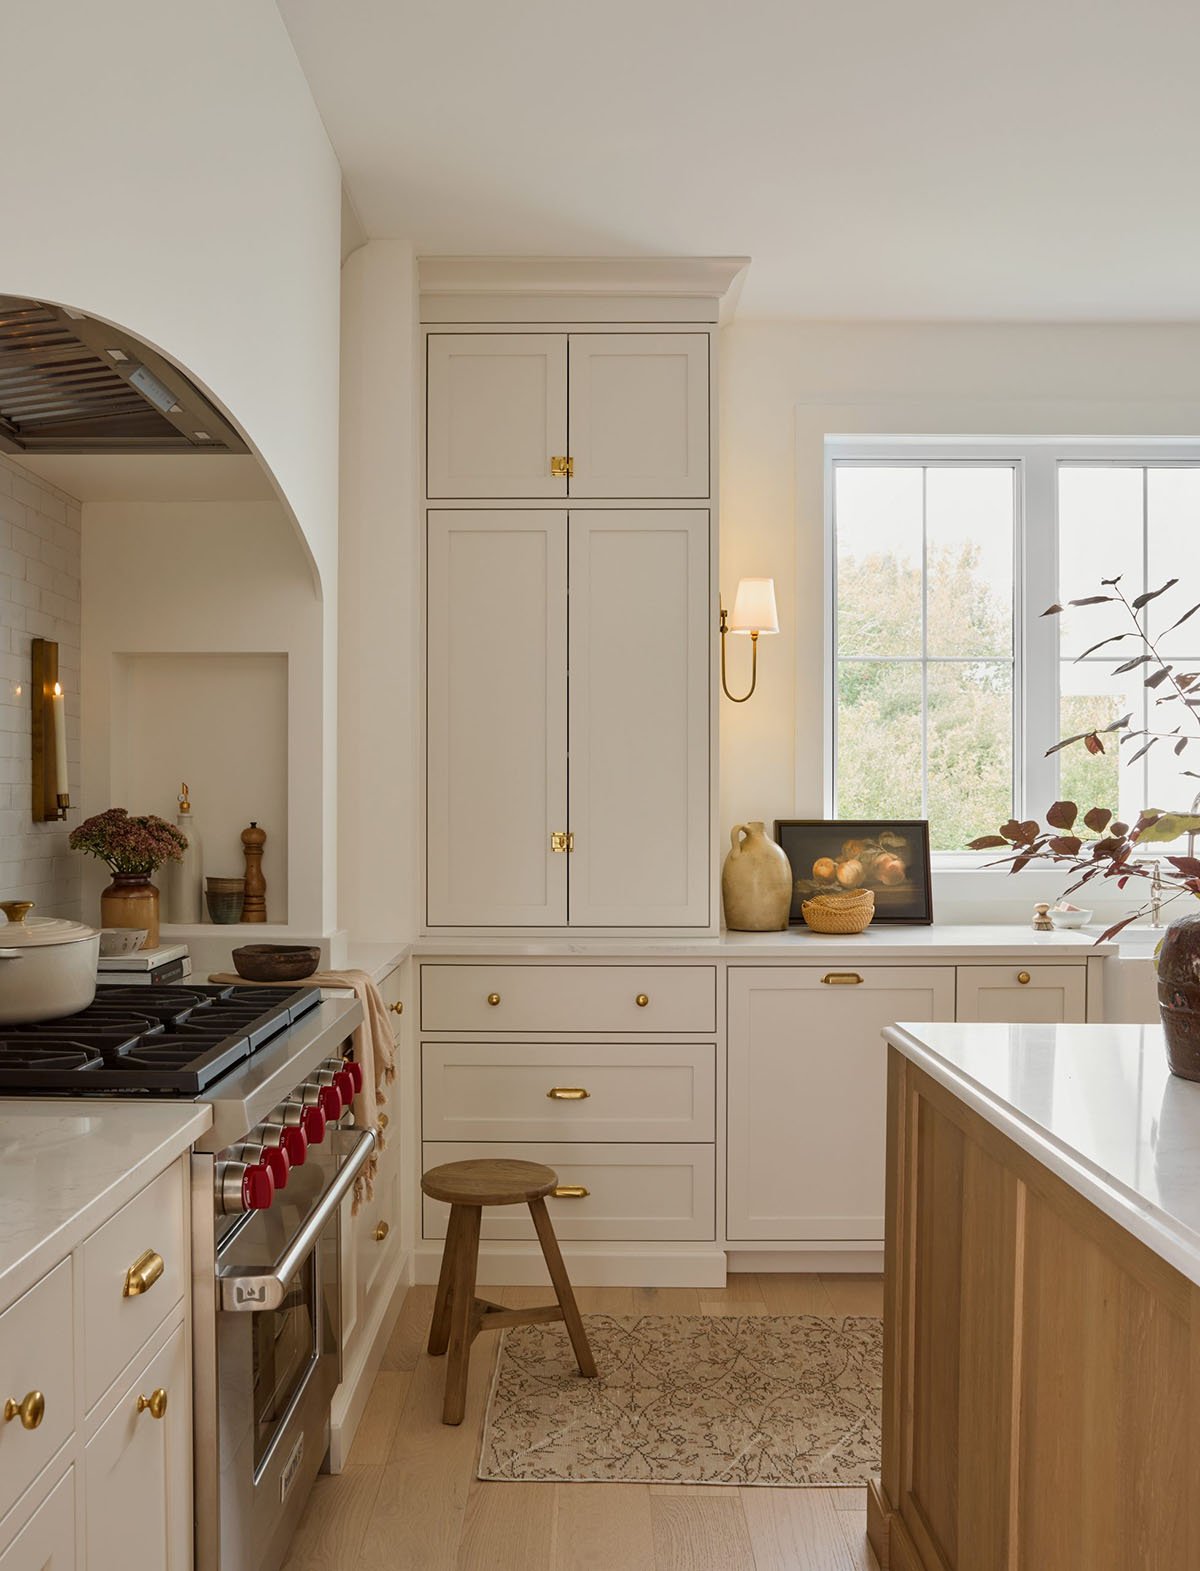 Benjamin Moore Pale Oak on kitchen cabinets with creamy white walls and gold hardware.